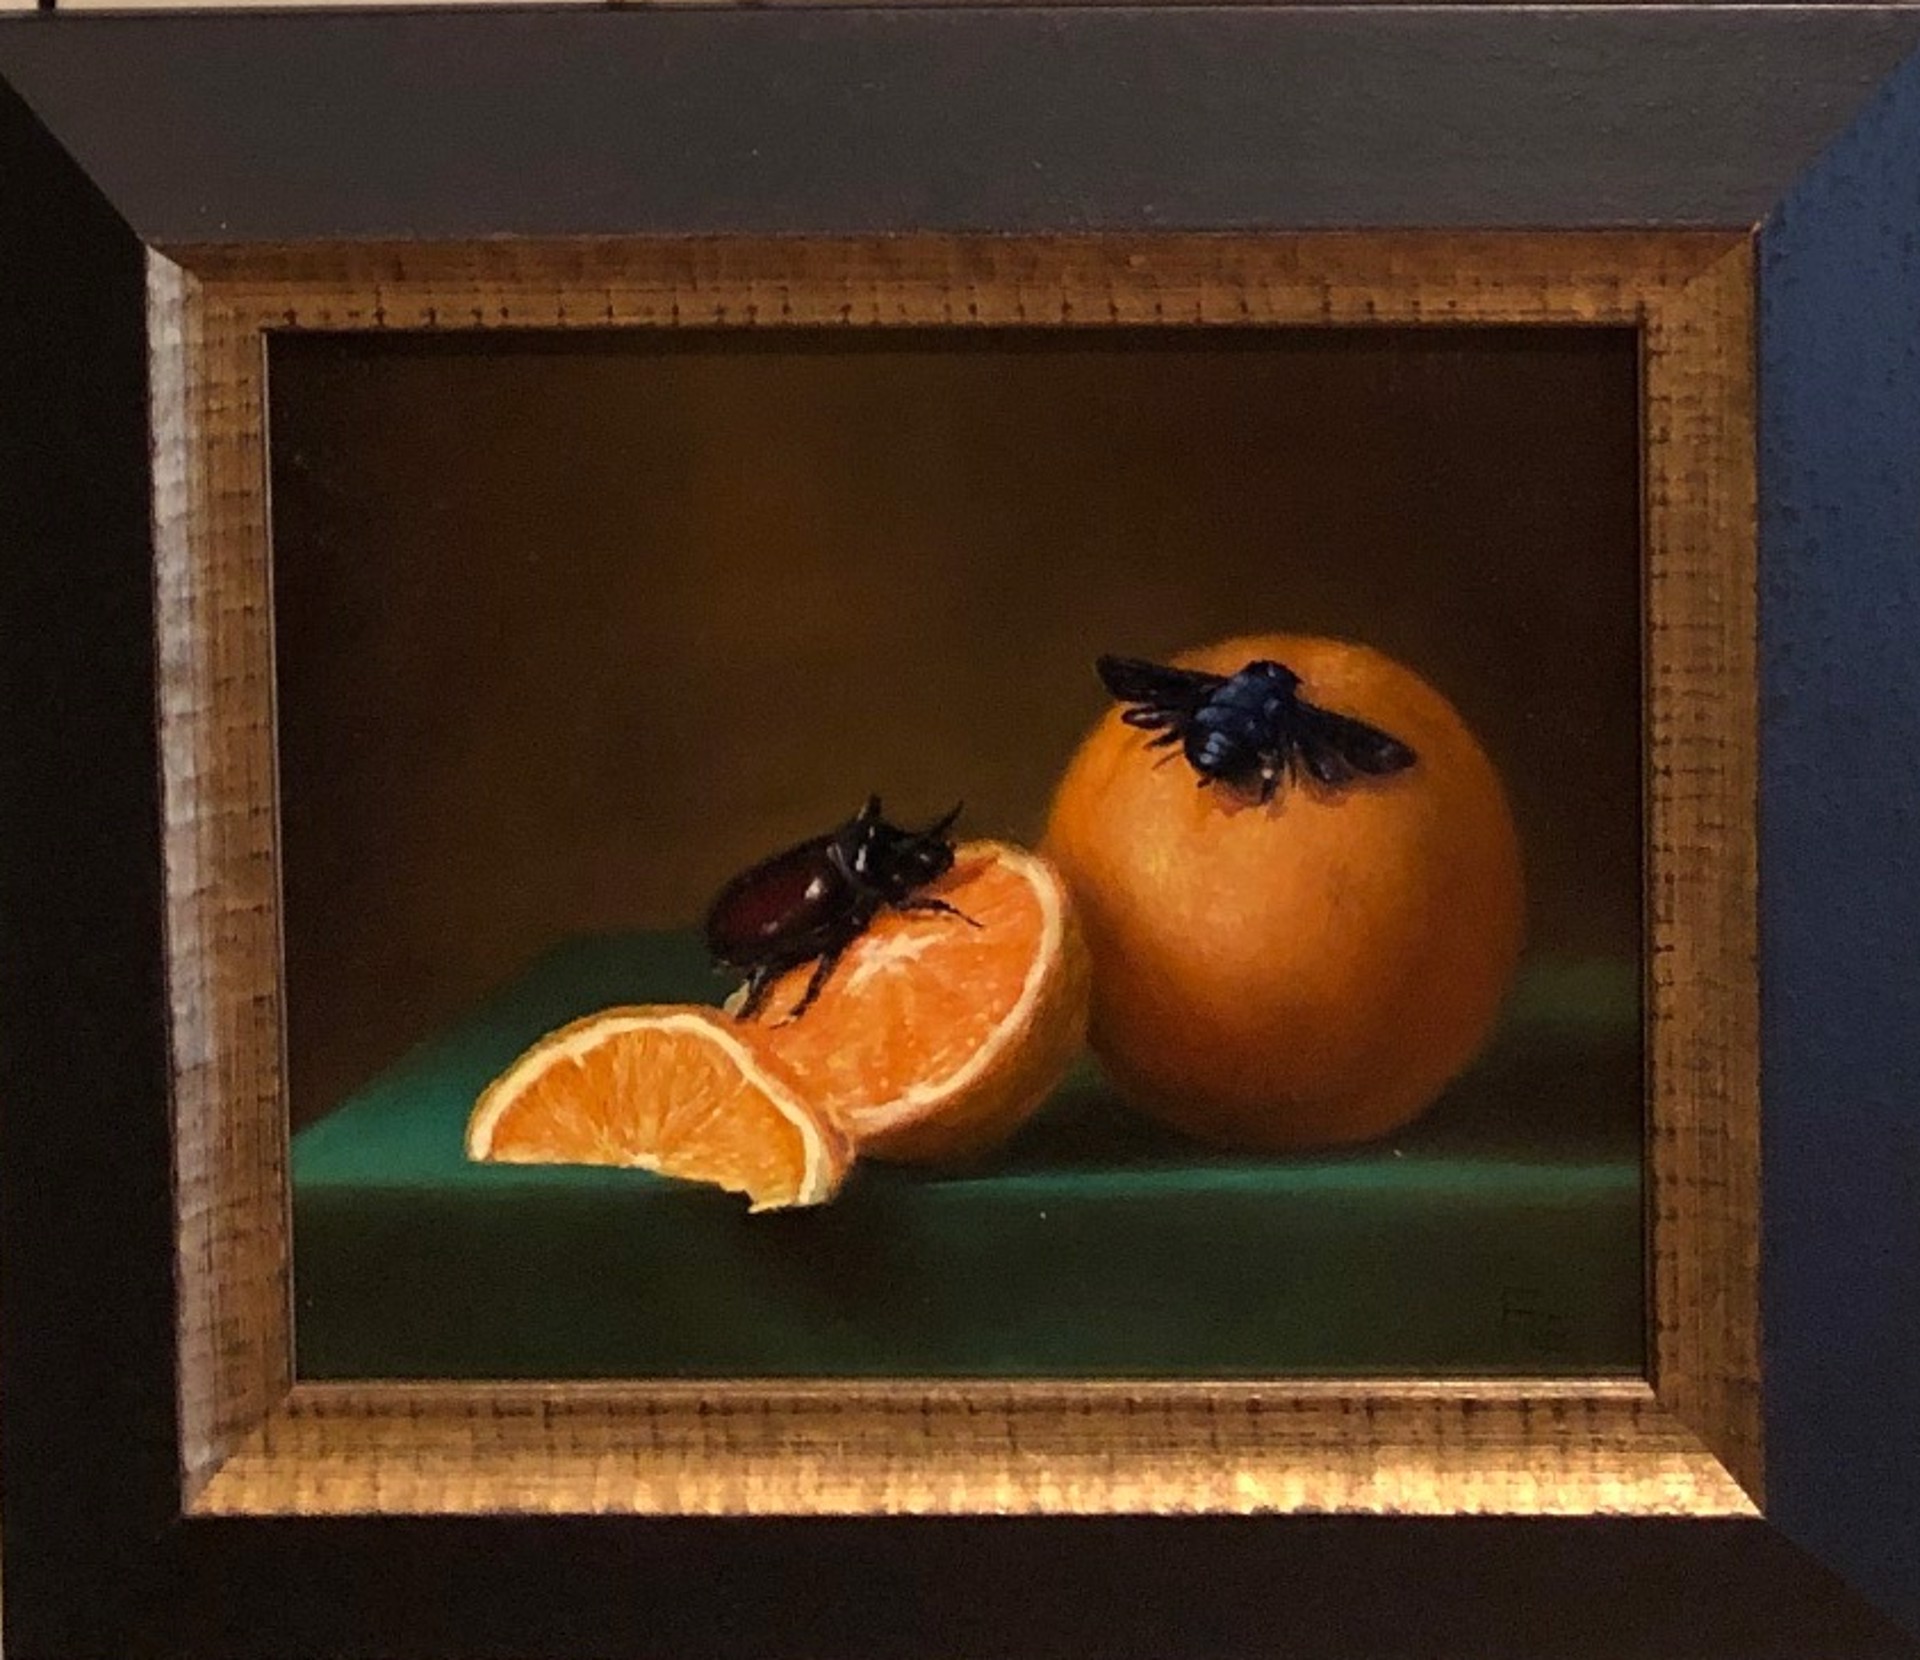 Still Life with Oranges, Rhino Beetle, and Carpenter Bee by Frankie Gollub